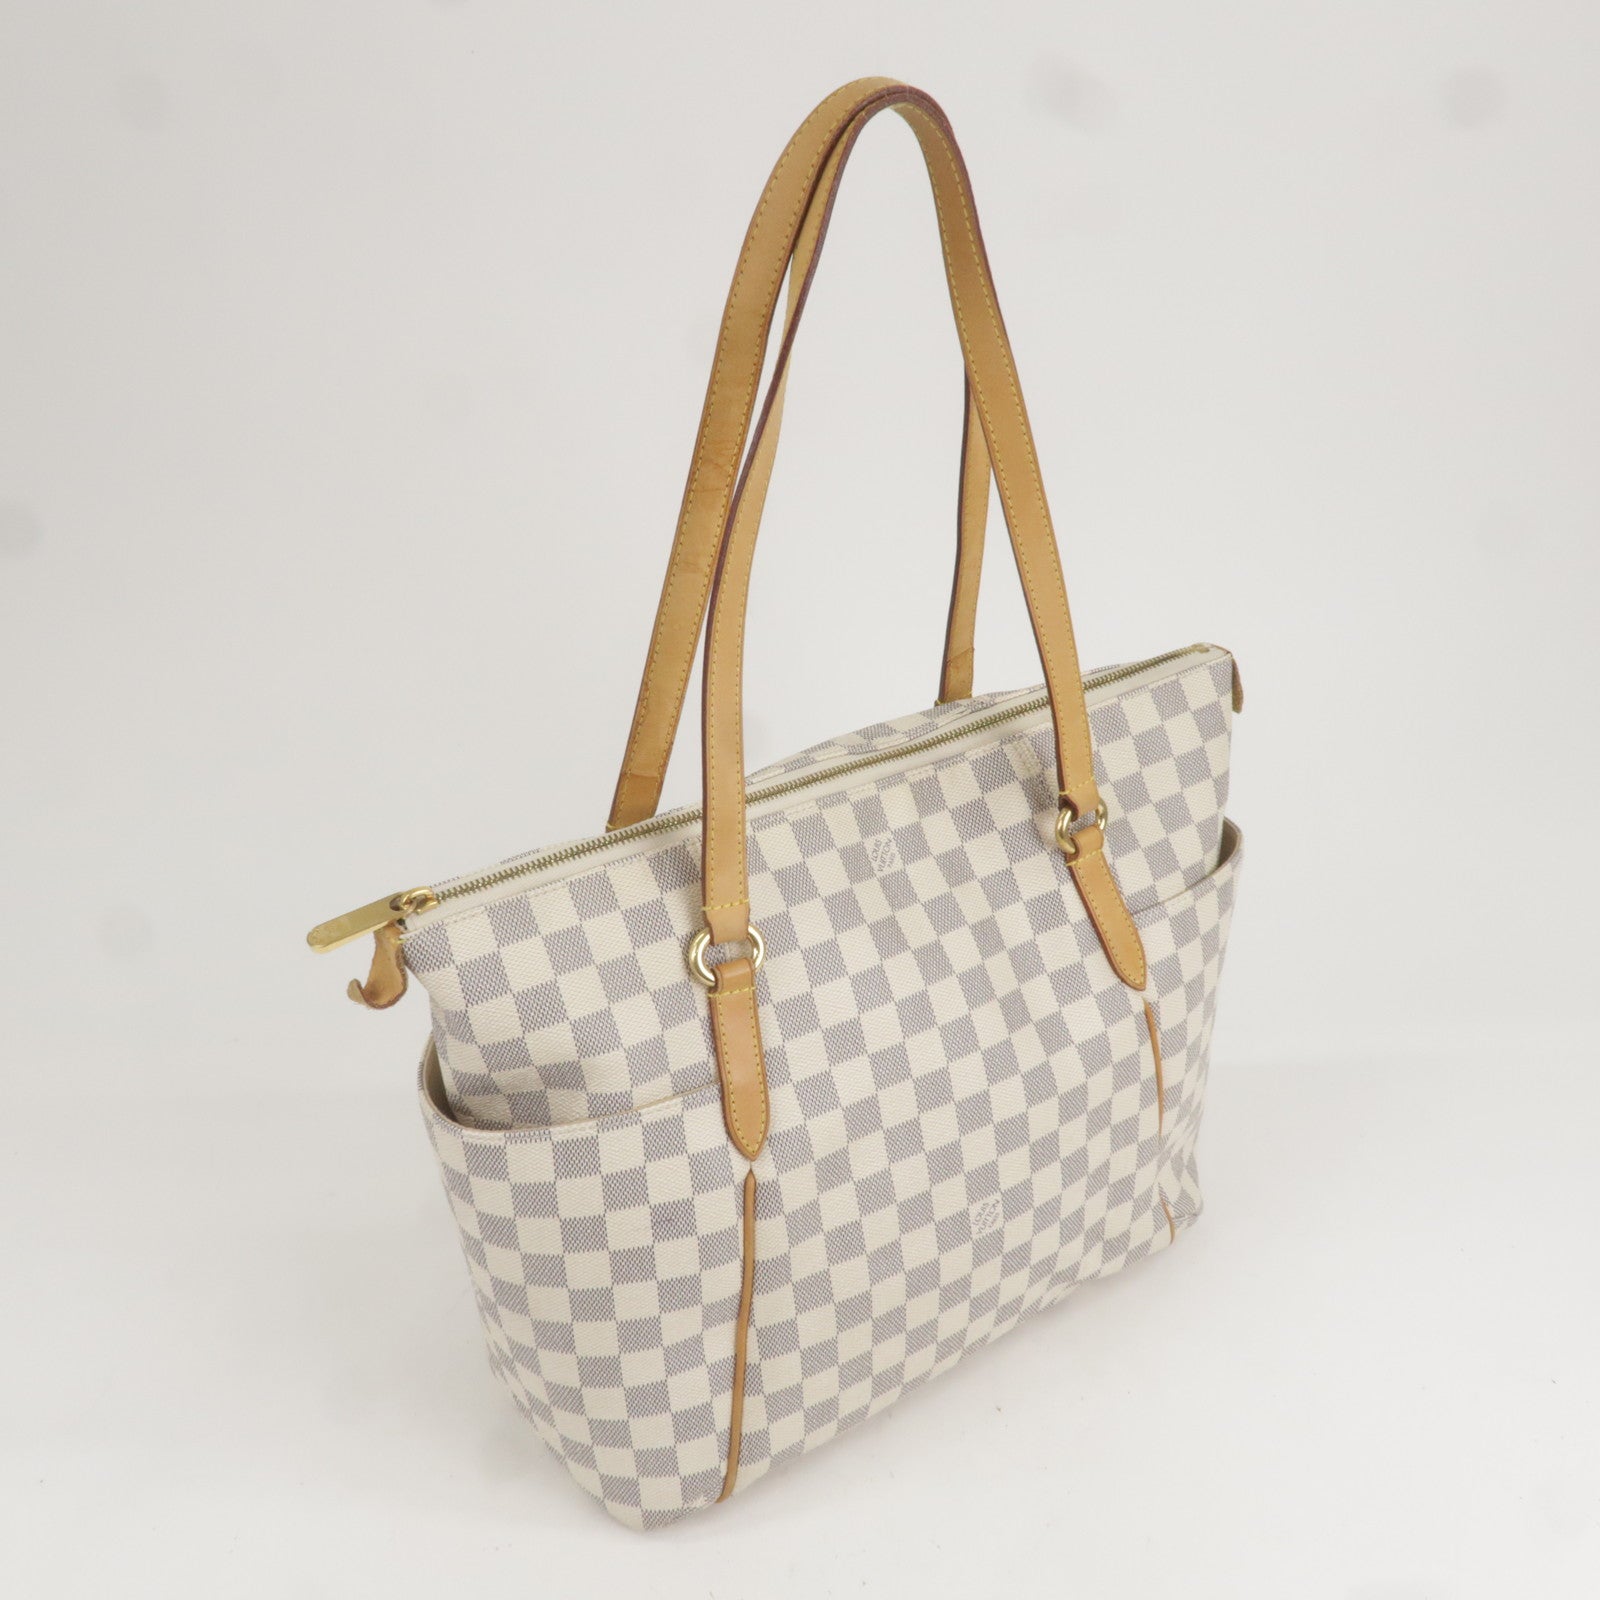 Louis Vuitton Totally MM Damier Azur Canvas Tote on SALE